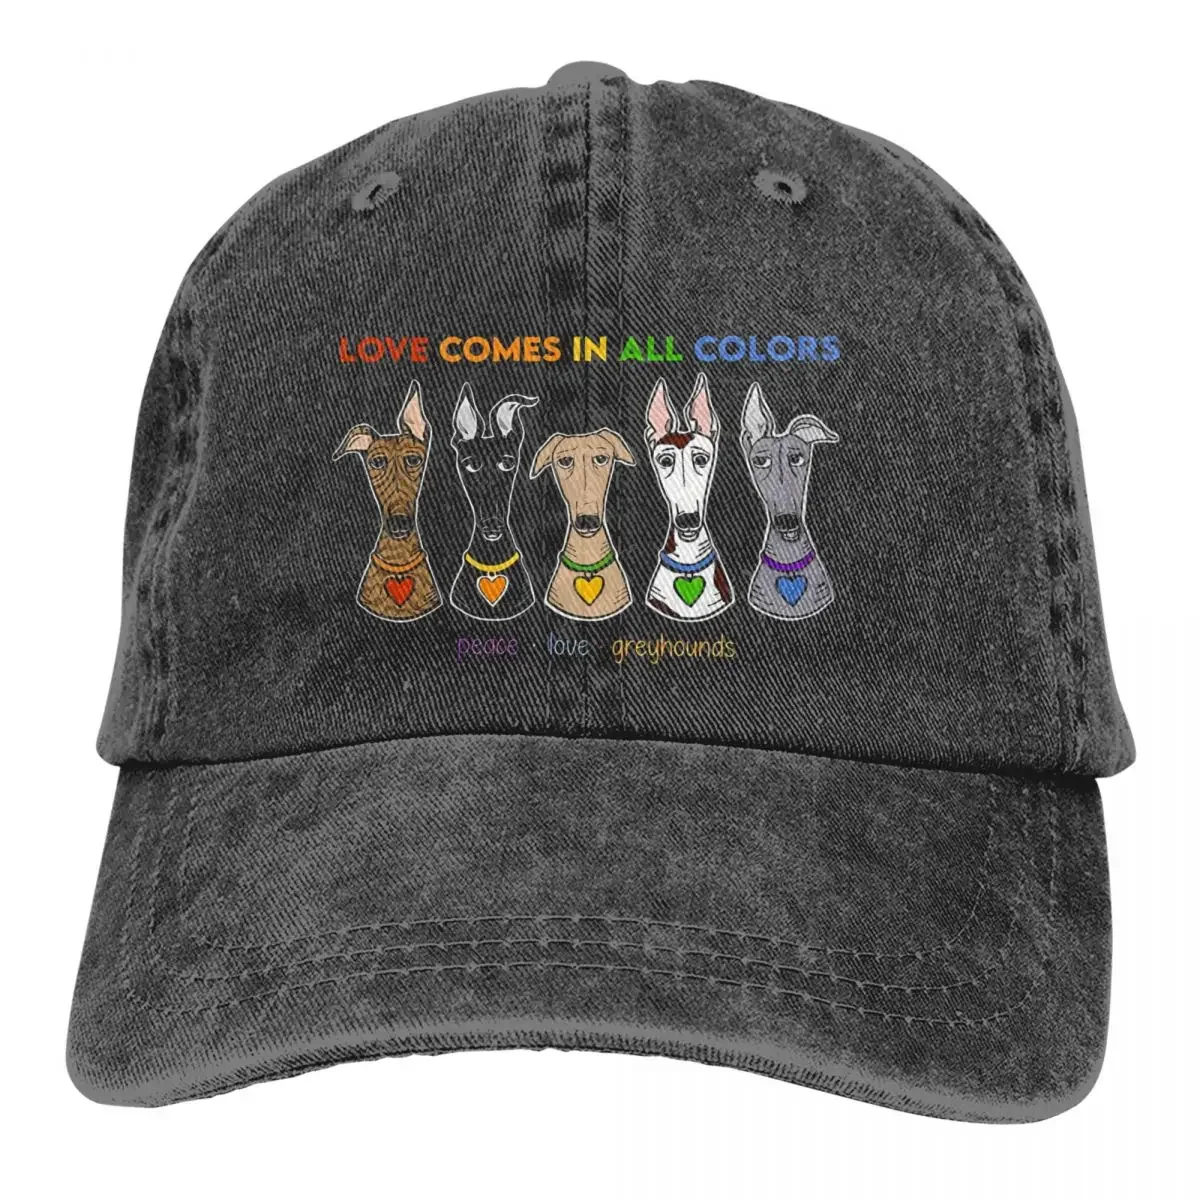 

Washed Men's Baseball Cap Peace Love Pride Graphic Funny Trucker Snapback Caps Dad Hat Geryhound Greyhounds Dog Golf Hats